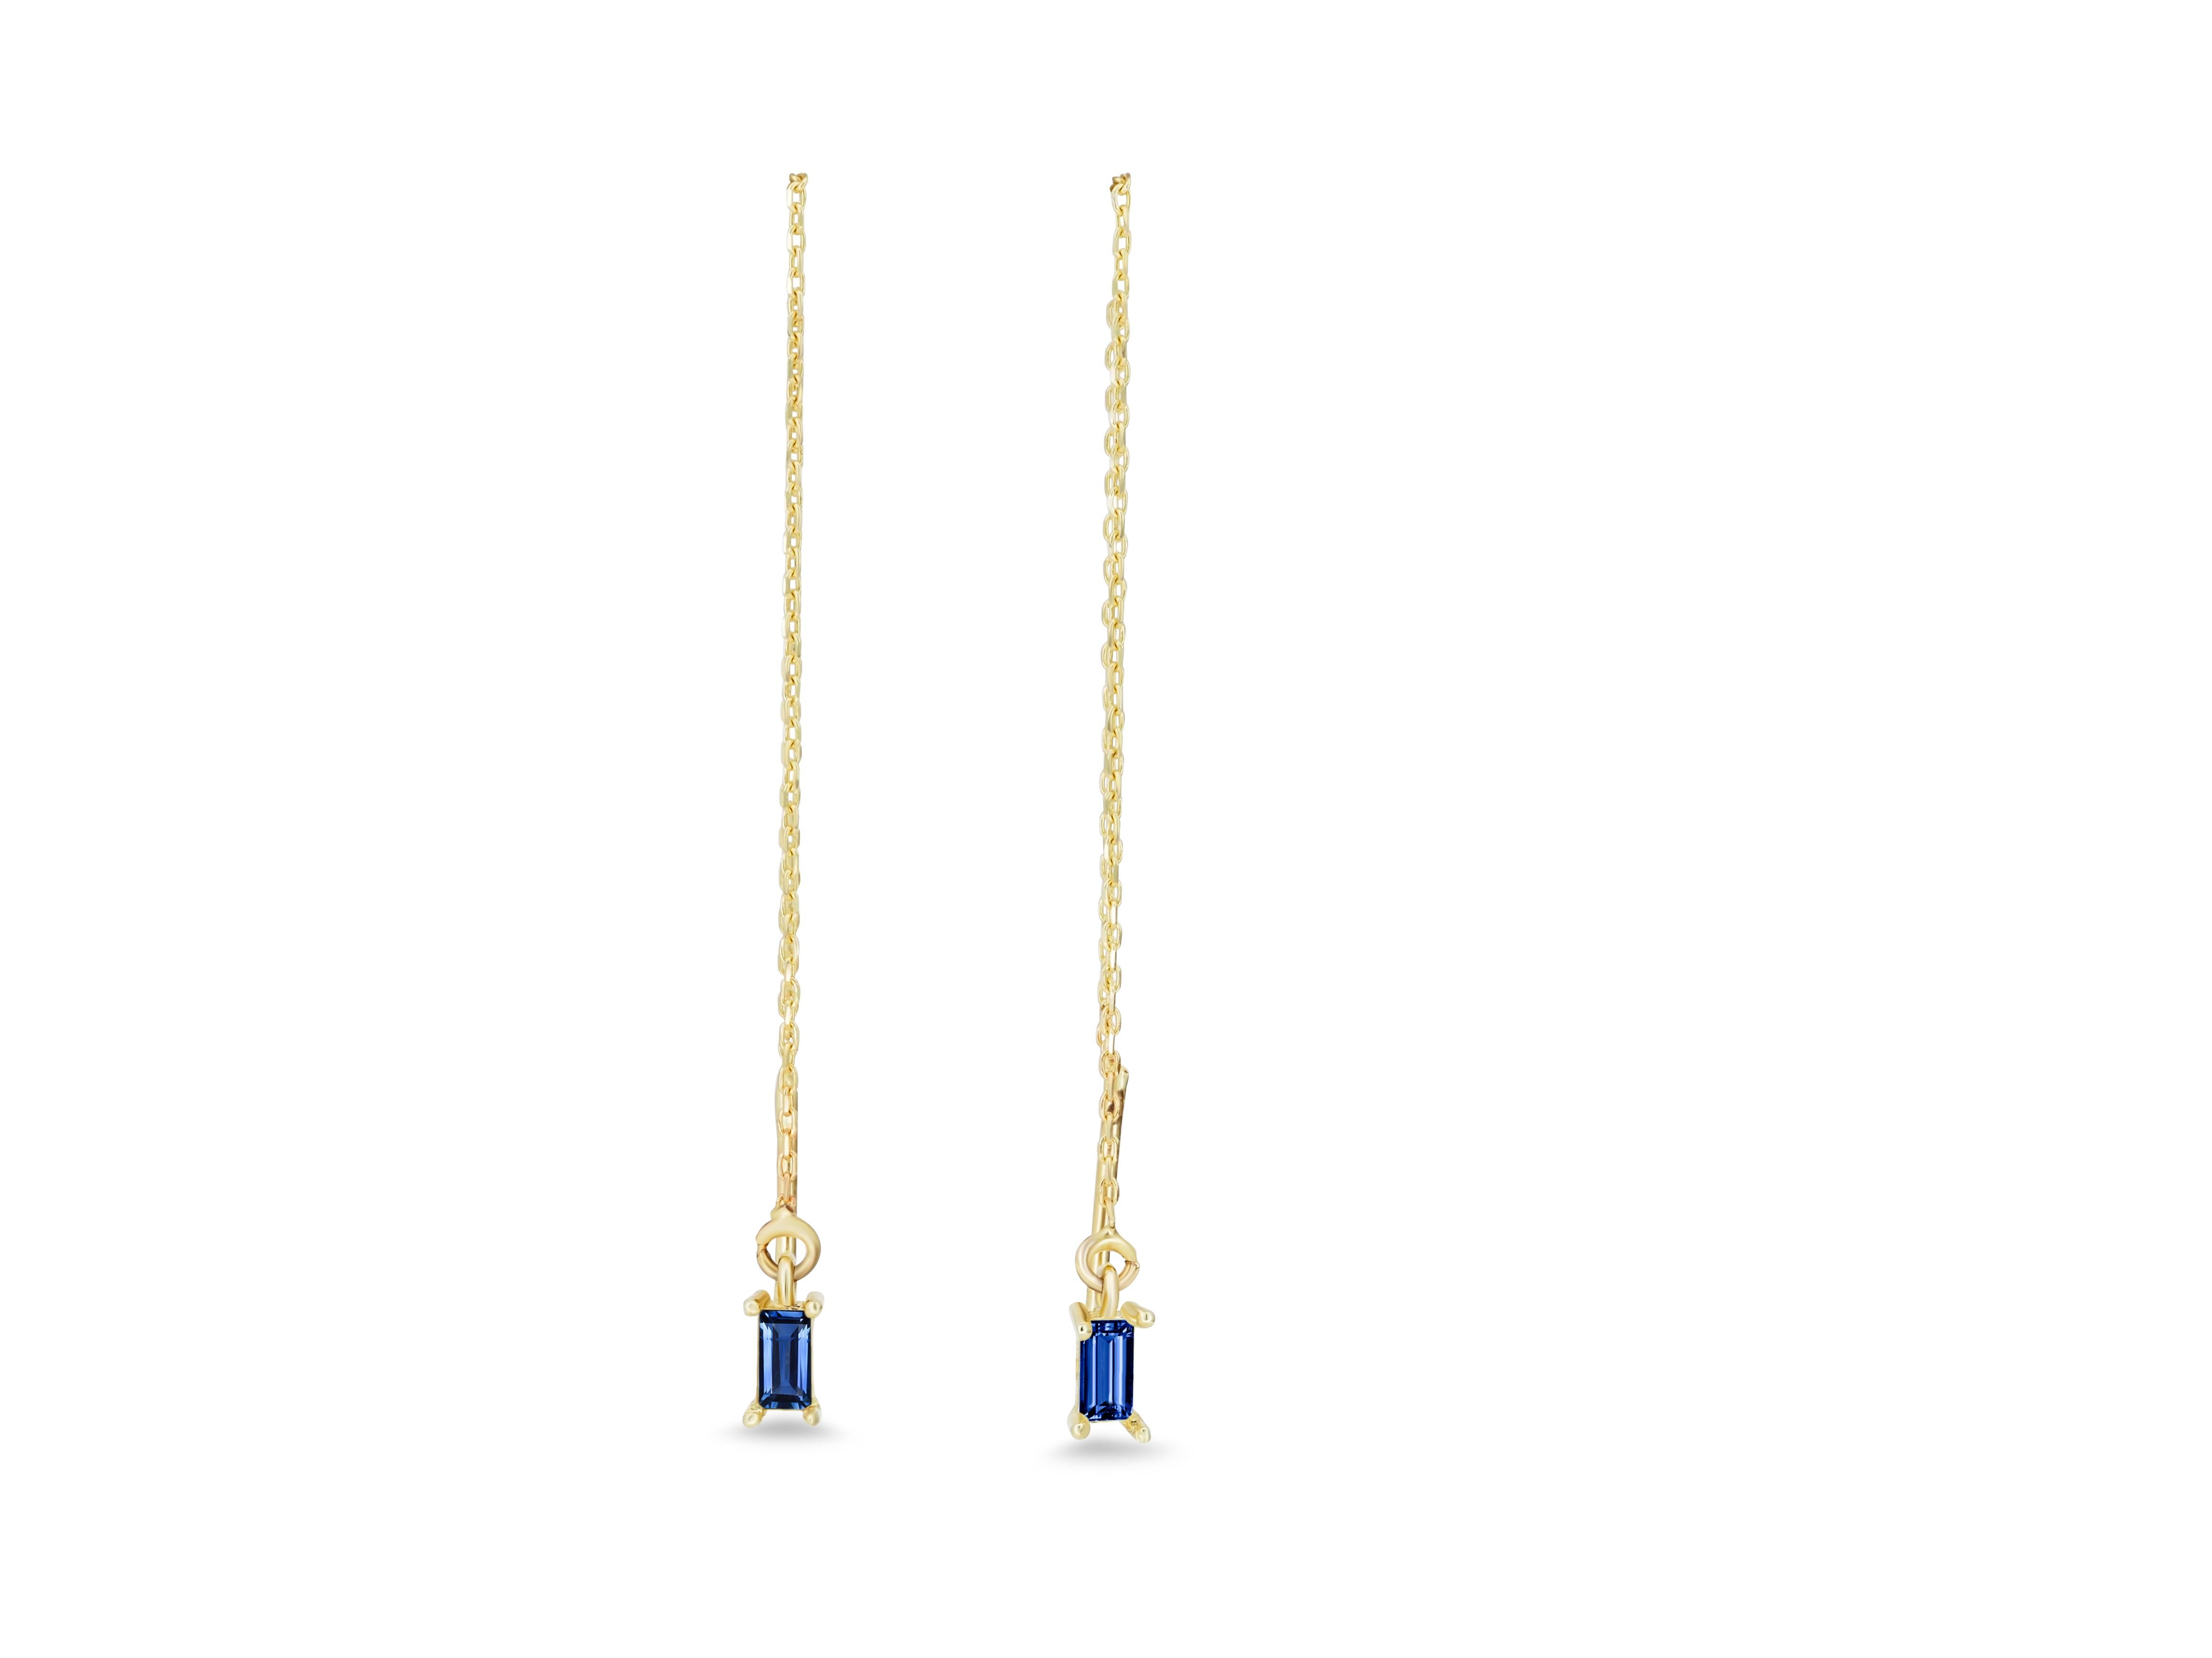 Modern 14k Solid Gold Drop Earrings with sapphire.  For Sale